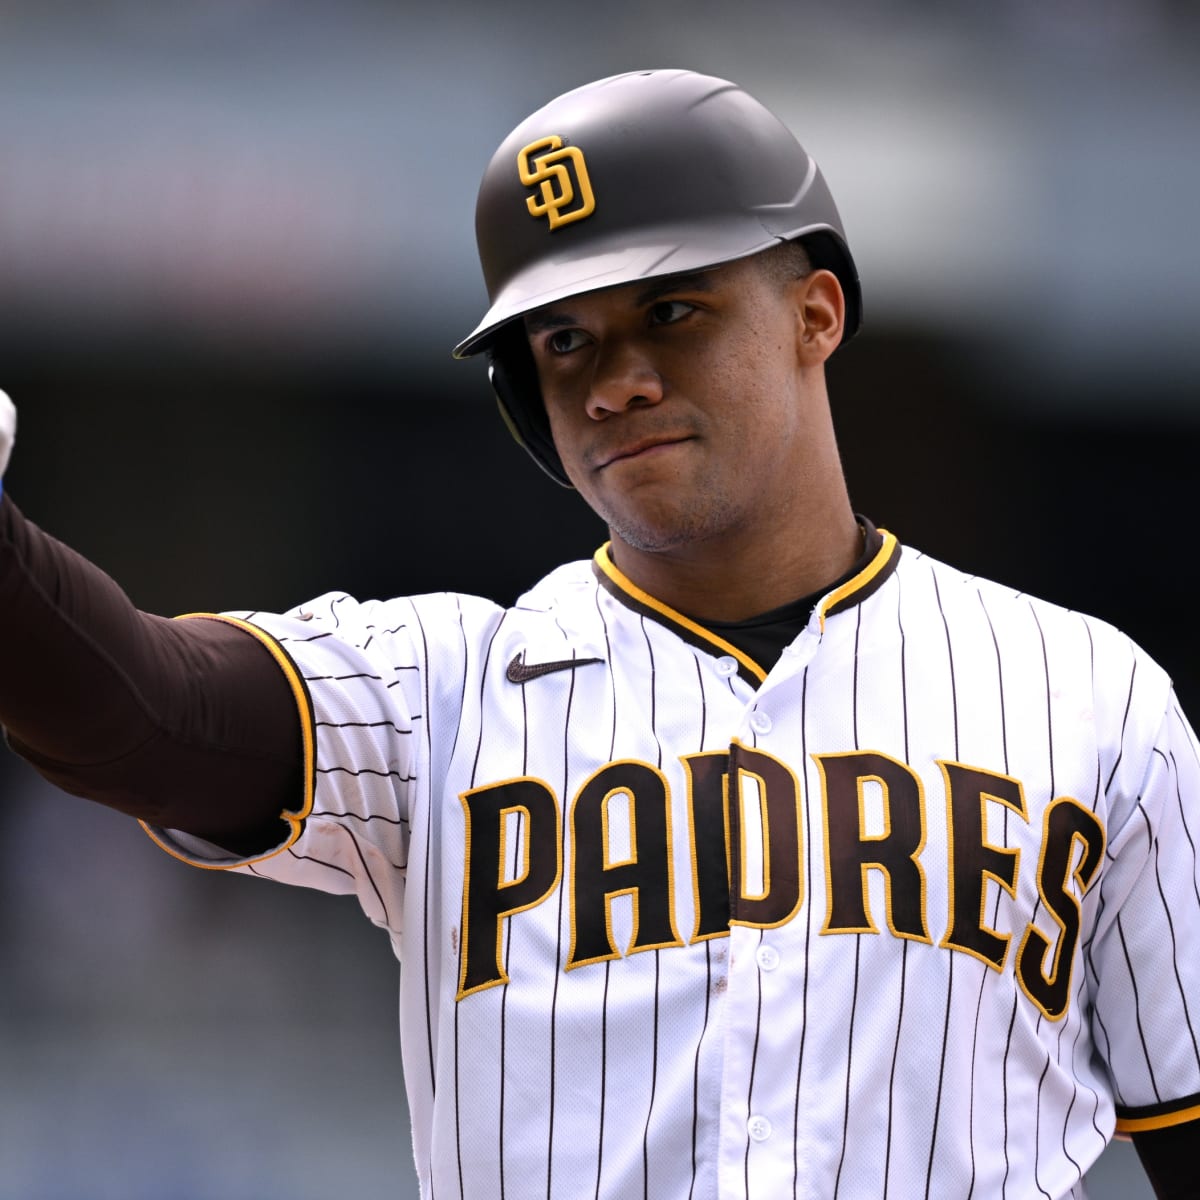 Padres News: Friars Have Moved Ha-Seong Kim to Leadoff Spot & Results Are  Showing - Sports Illustrated Inside The Padres News, Analysis and More